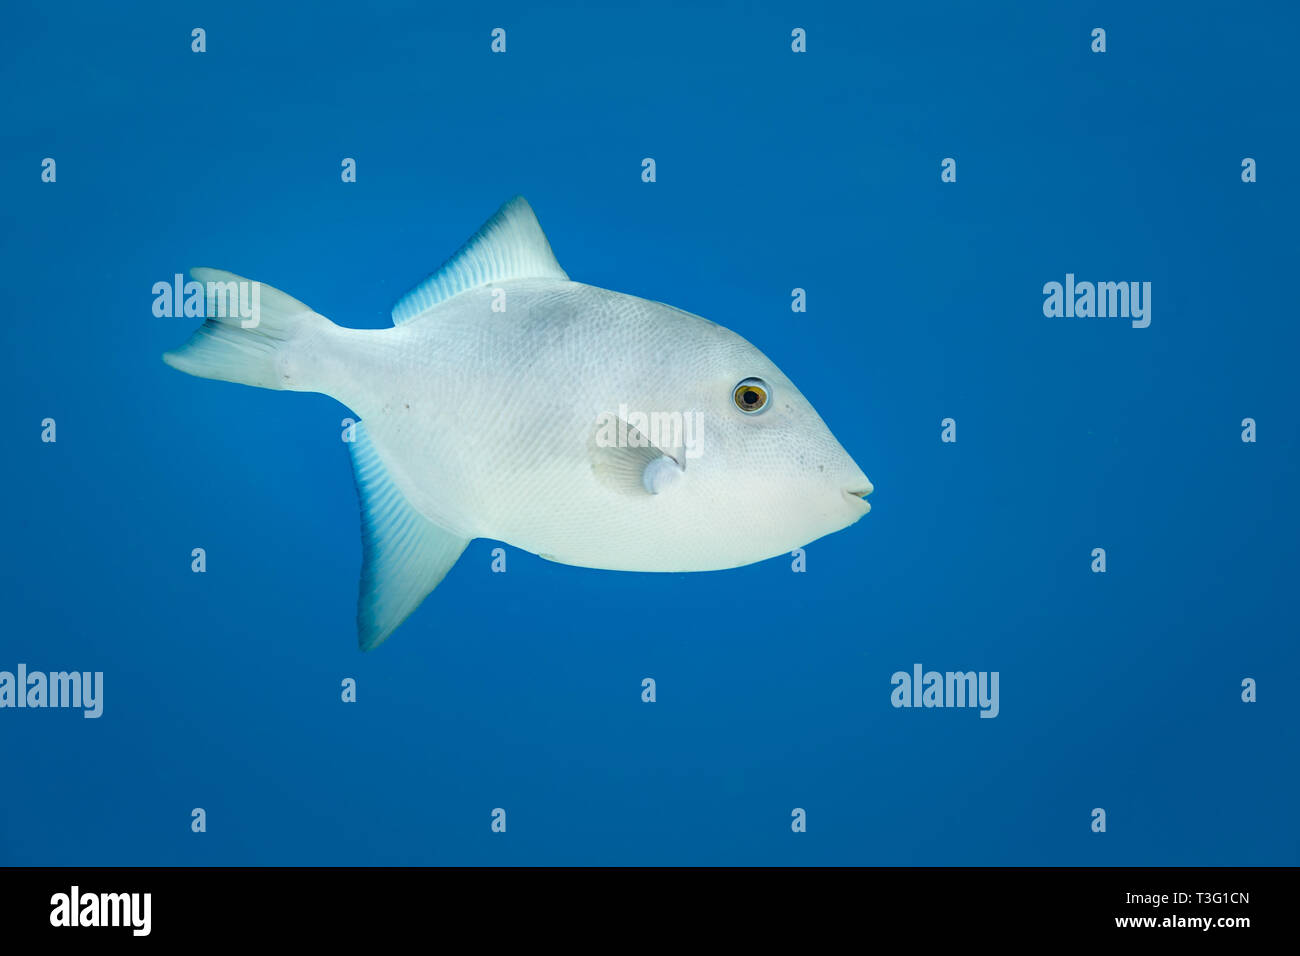 white or gray trigger fish, closeup of side Stock Photo